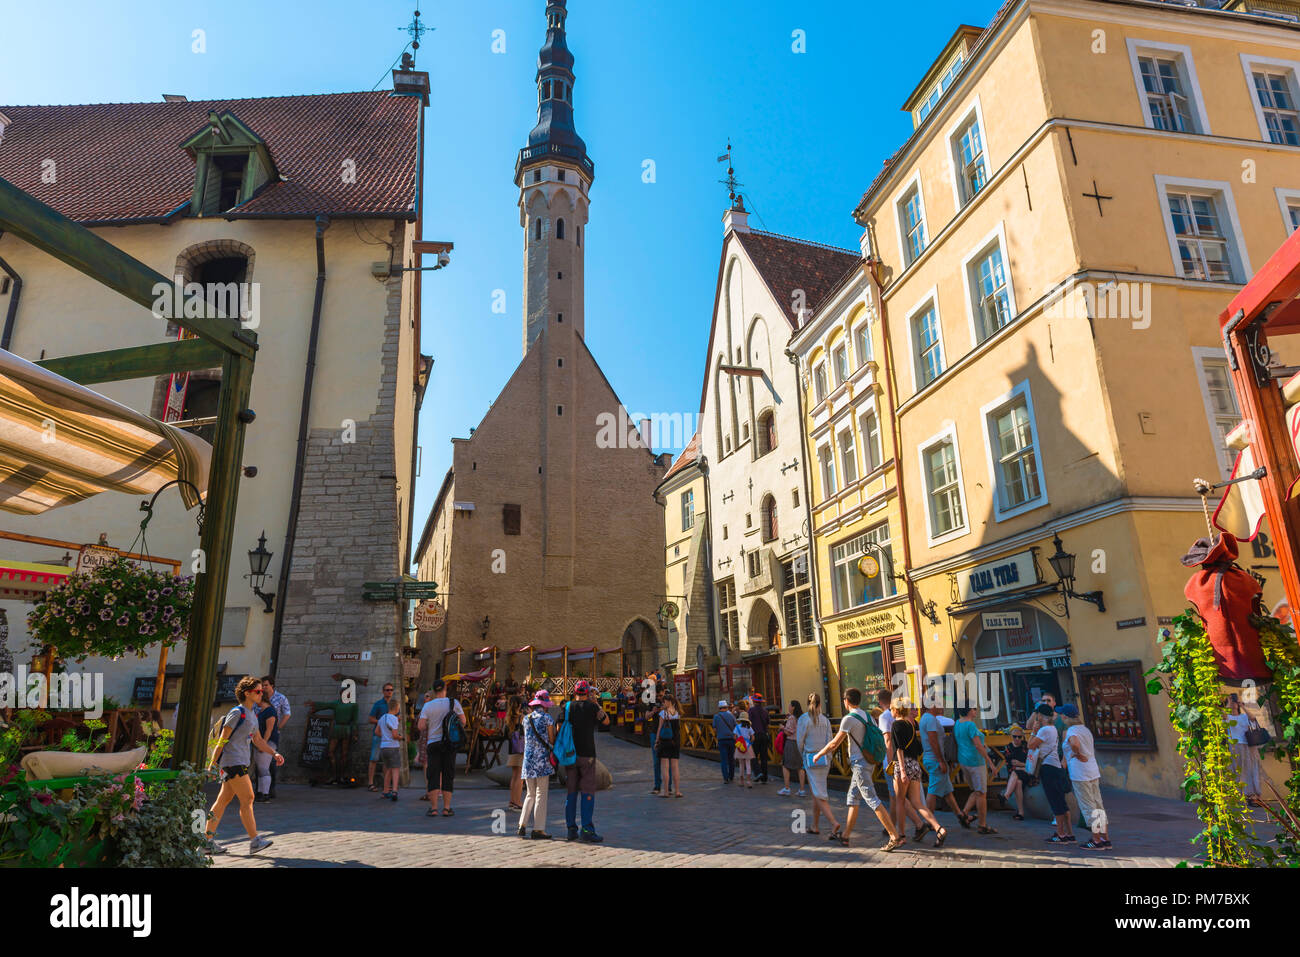 Tallinn Old Town, view in summer of Tallinn Town Hall Tower sited at the end of Vanaturu kael in the historic city center Old Town quarter, Estonia Stock Photo